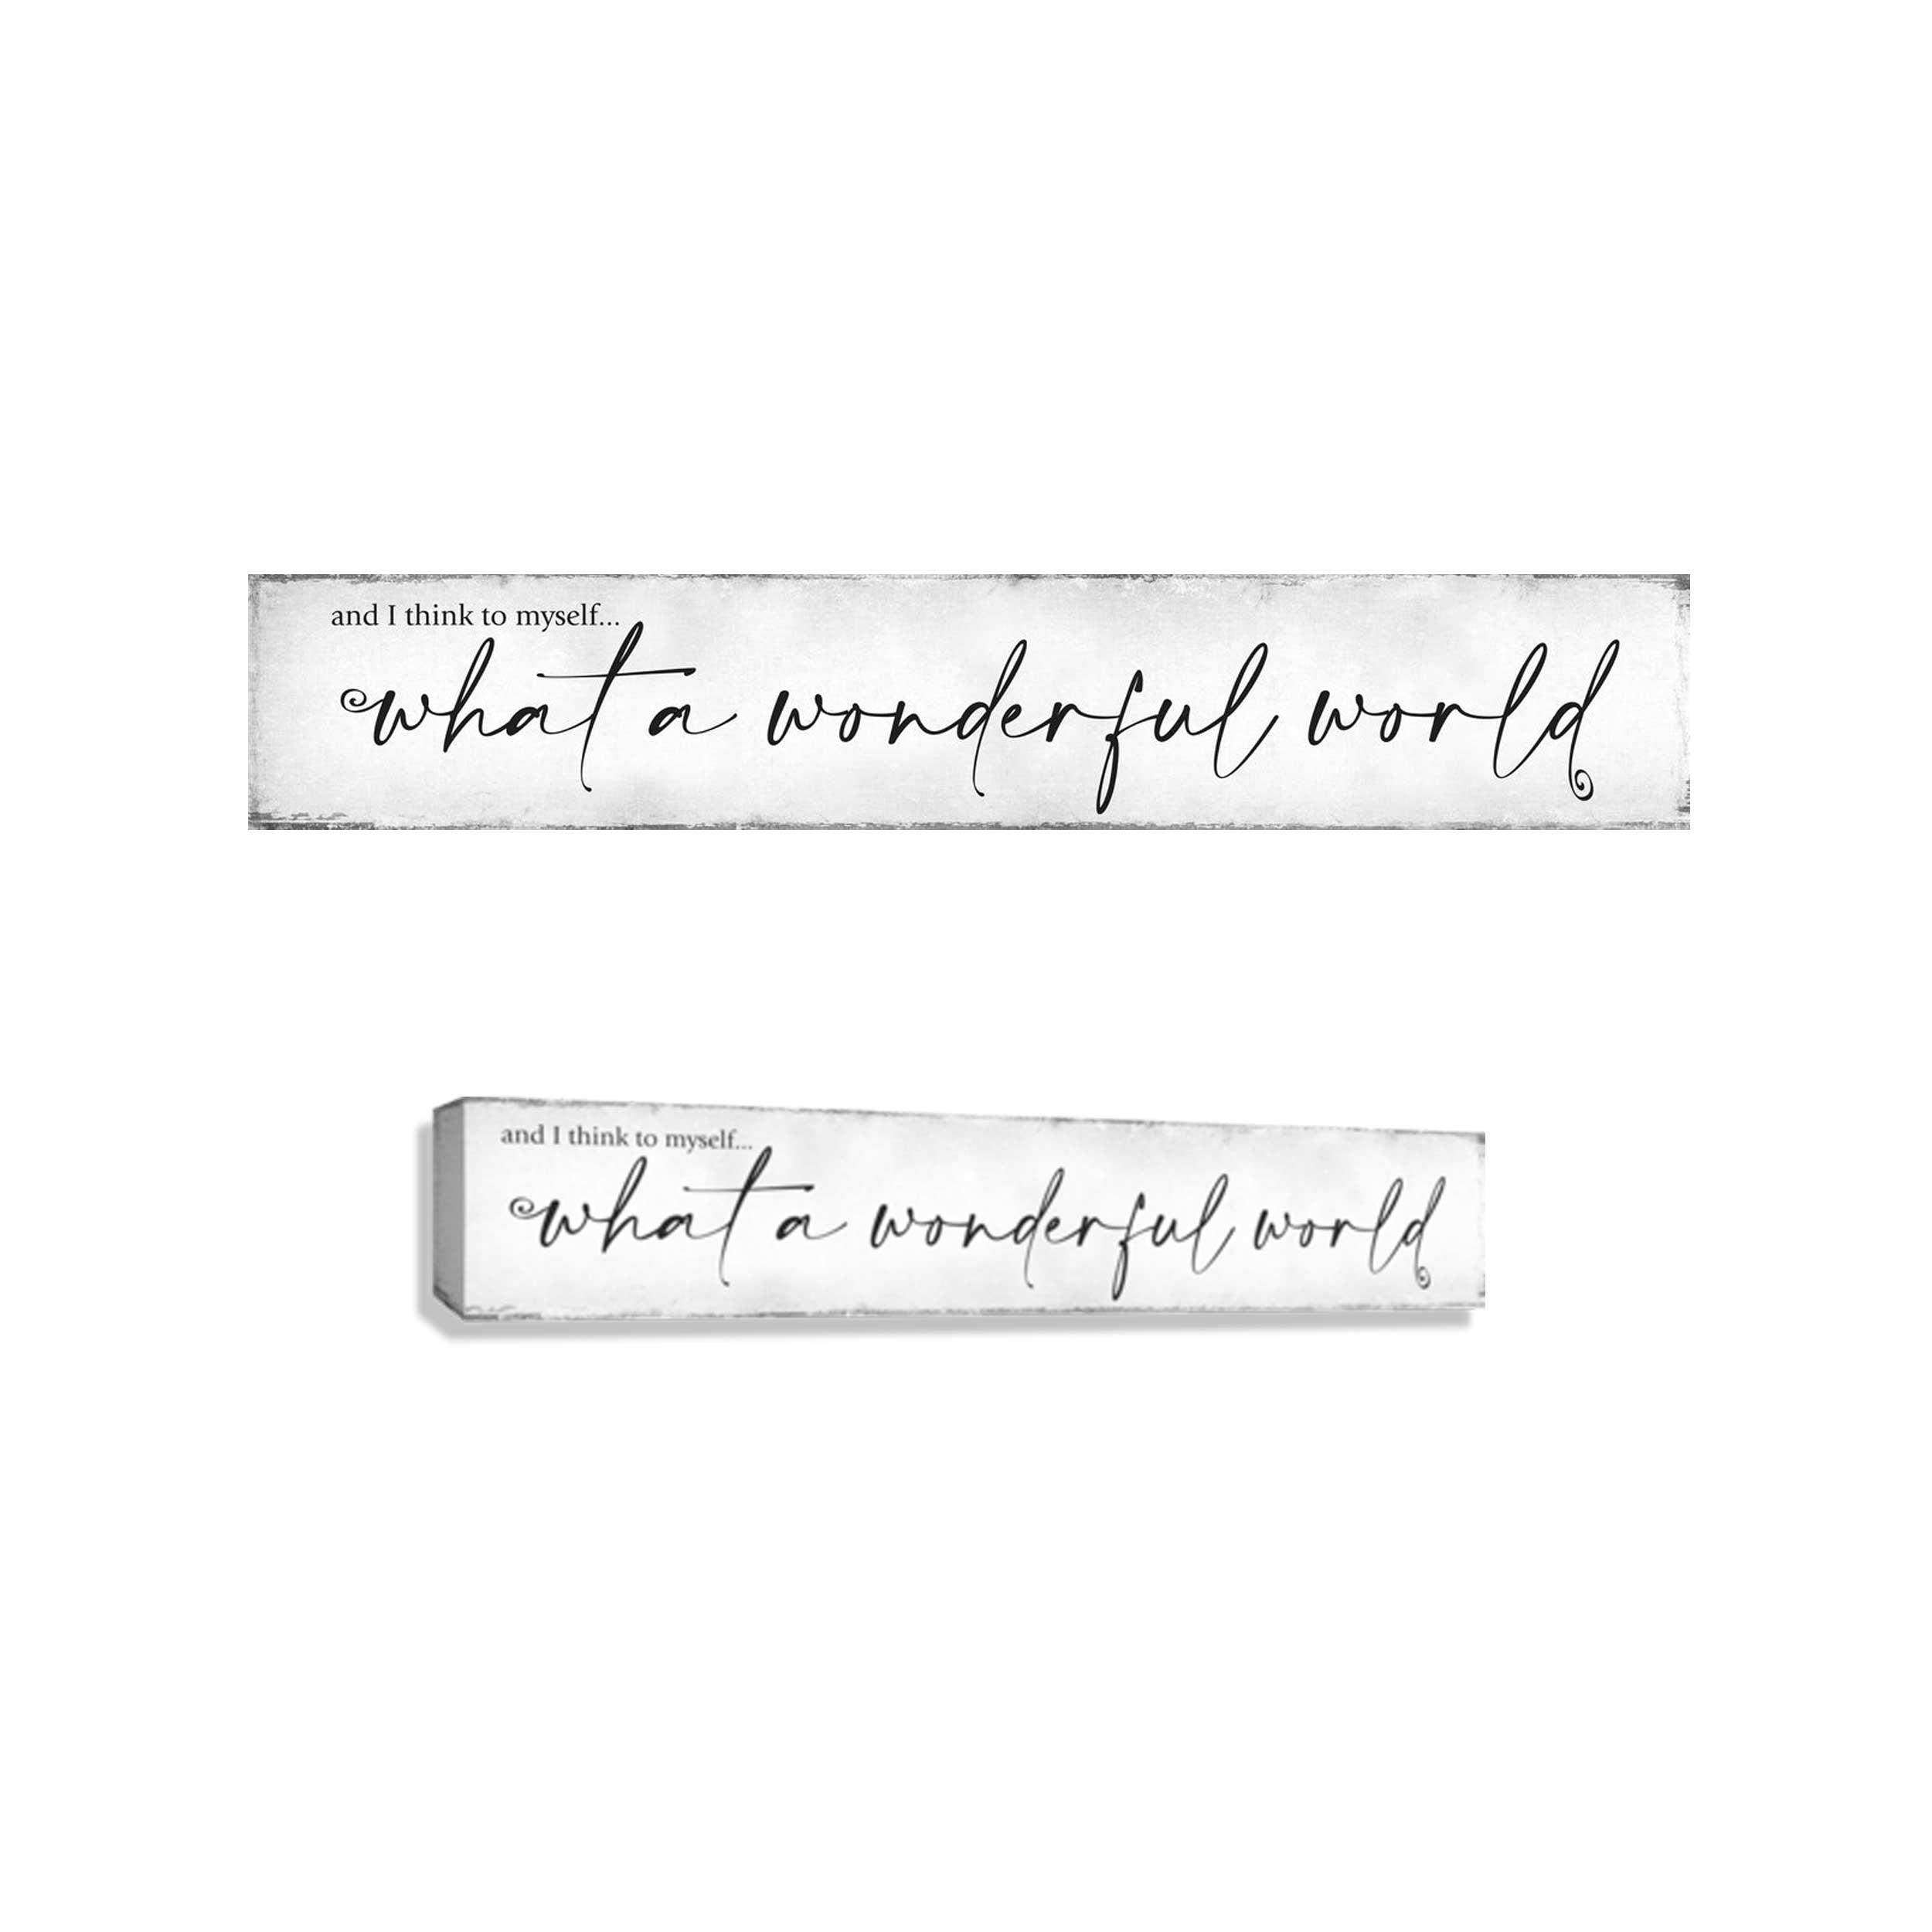 Reads "and I think to myself... what a wonderful world" on distressed white background